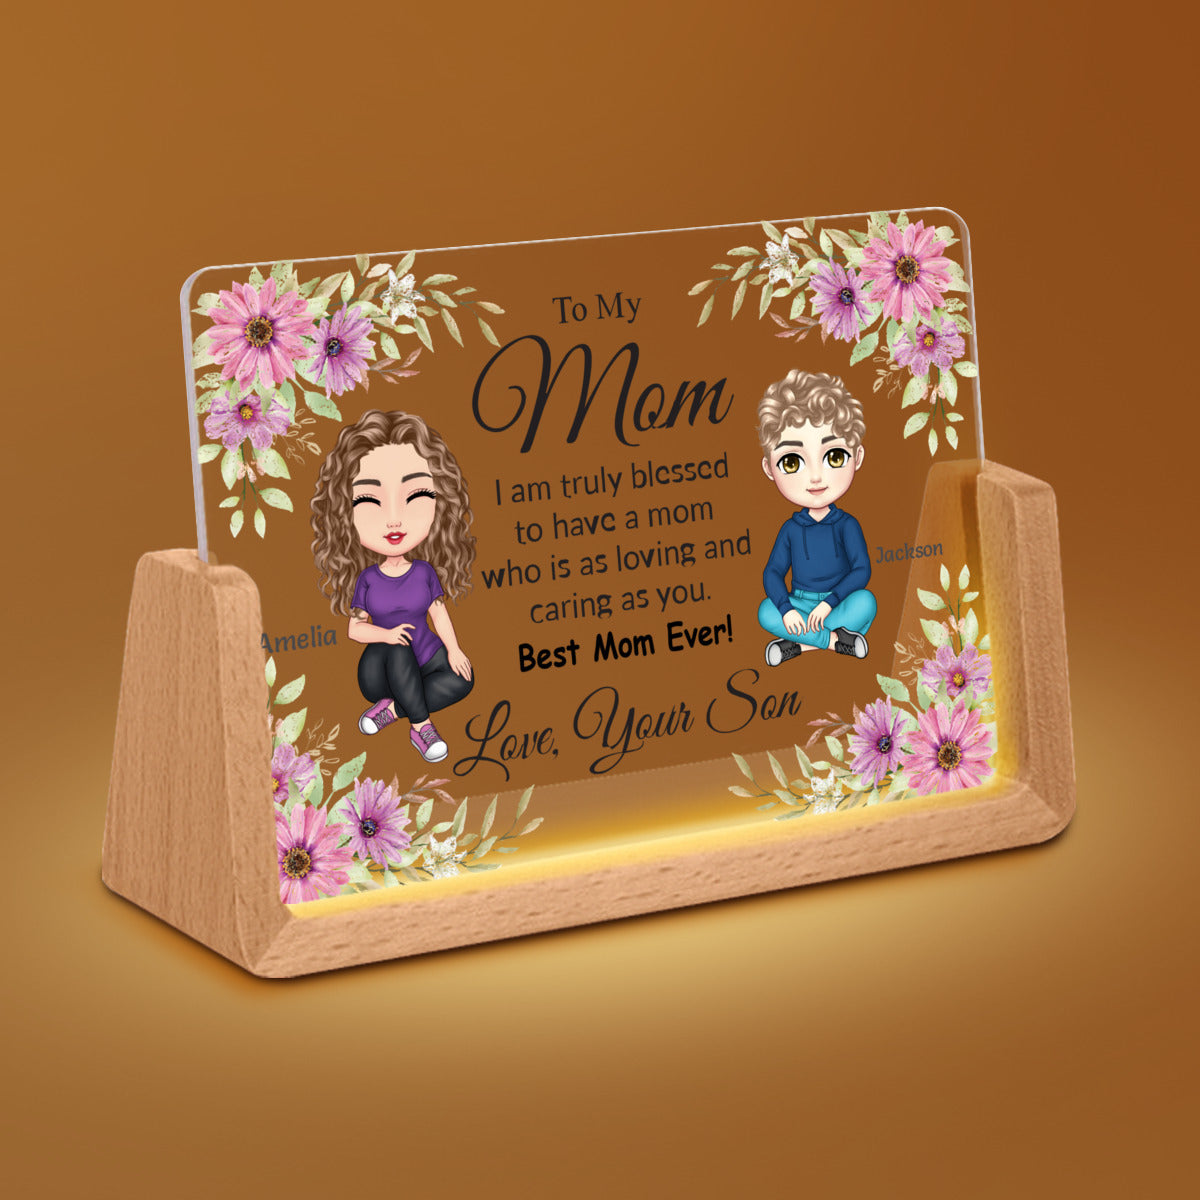 I am Truly Blessed to Have a Mom-Personalized Acrylic Plaque Night Light for Mom